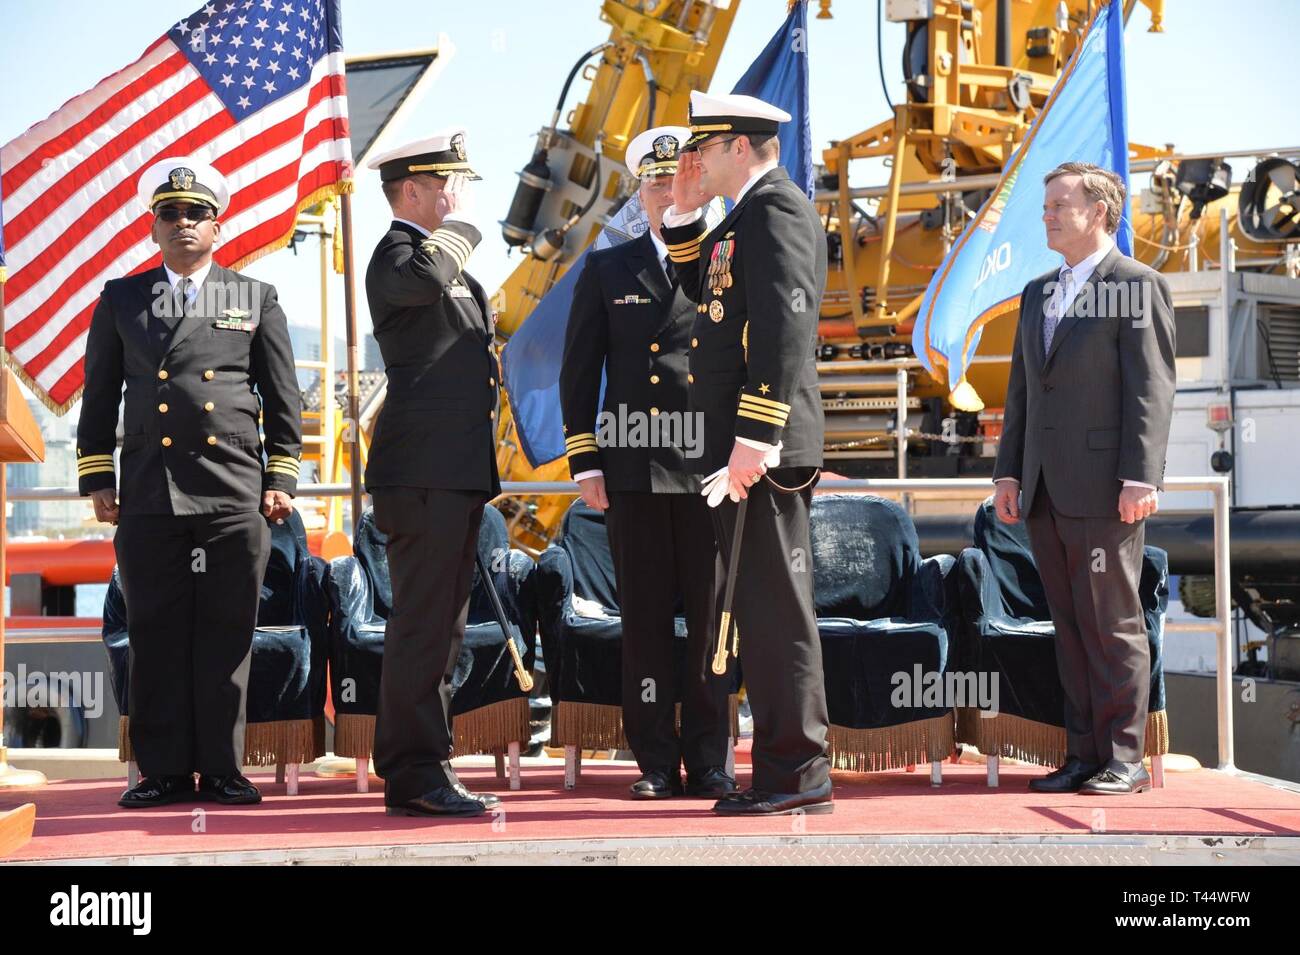 DIEGO (Feb. 22, 2019) - Capt. Michael Eberlein, (left), is relieved by Cmdr. Joshua Powers as commanding officer of Undersea Rescue Command (URC) at a change of command ceremony held at Naval Air Station North Island. URC is the U.S. Navy’s only submarine rescue capability, ready to deploy around the world in the event of a submarine emergency. Stock Photo